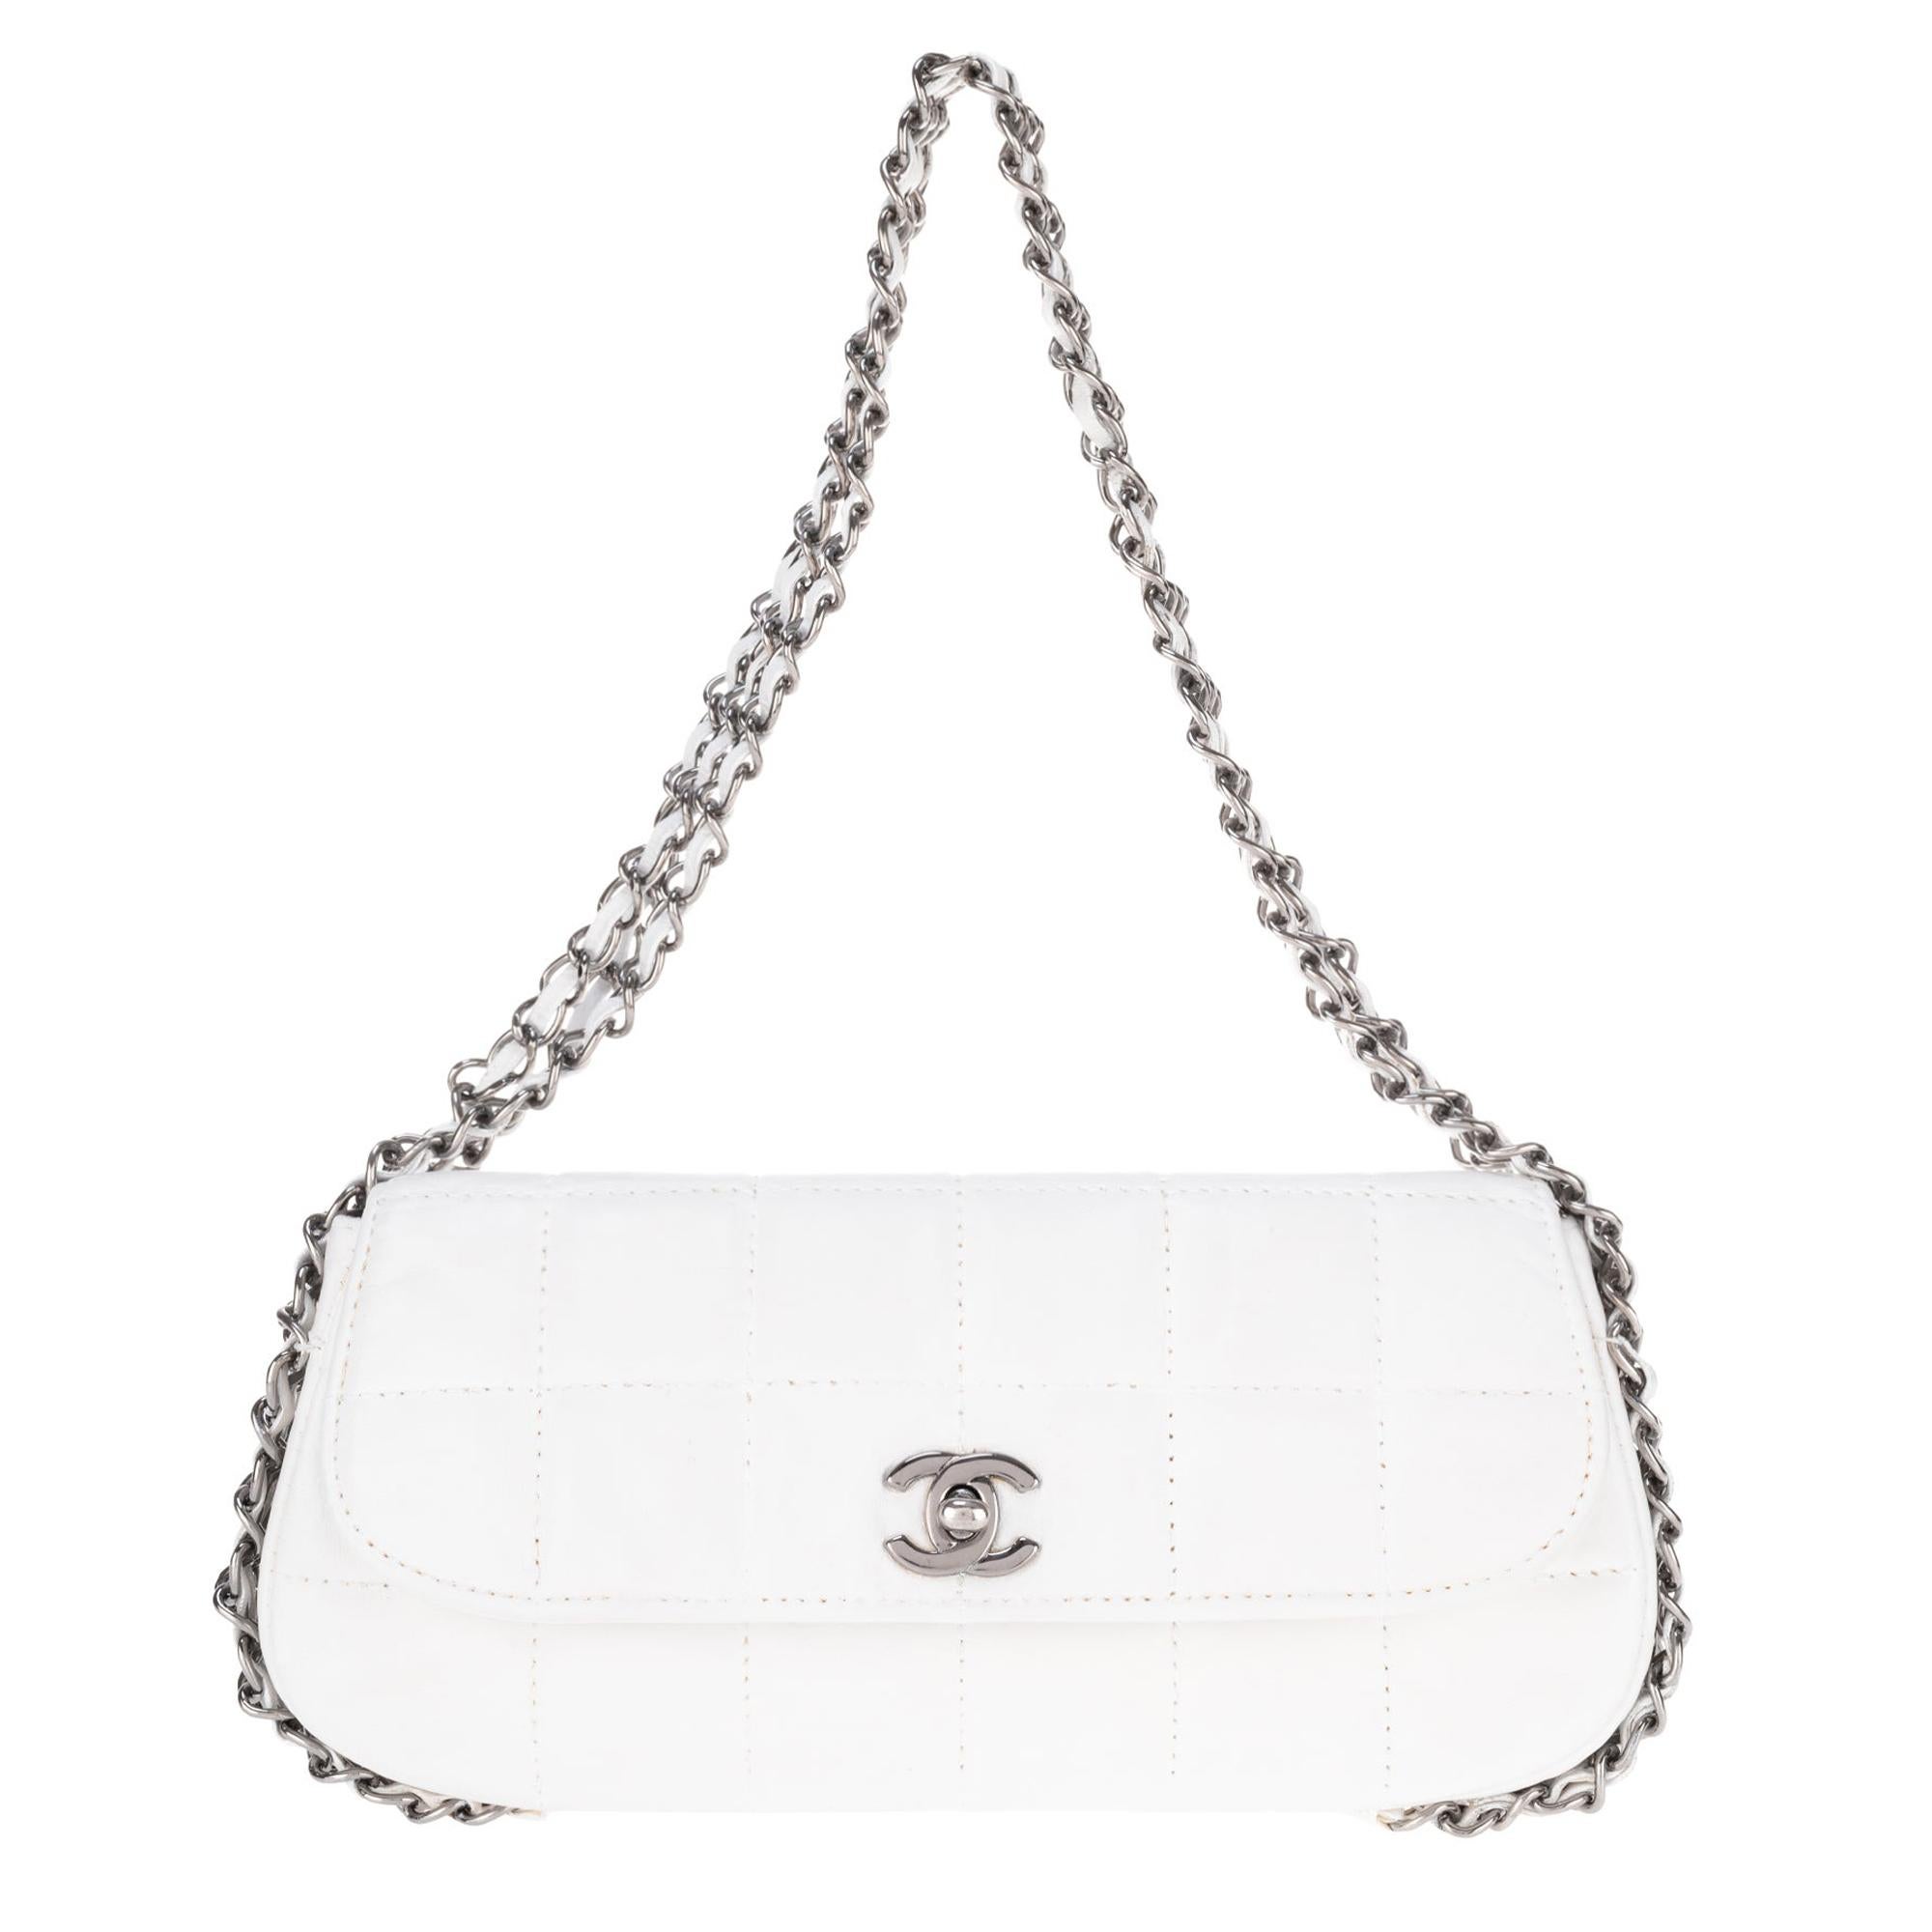 Stunning Chanel Handbag in white quilted lambskin & triple silver chain !